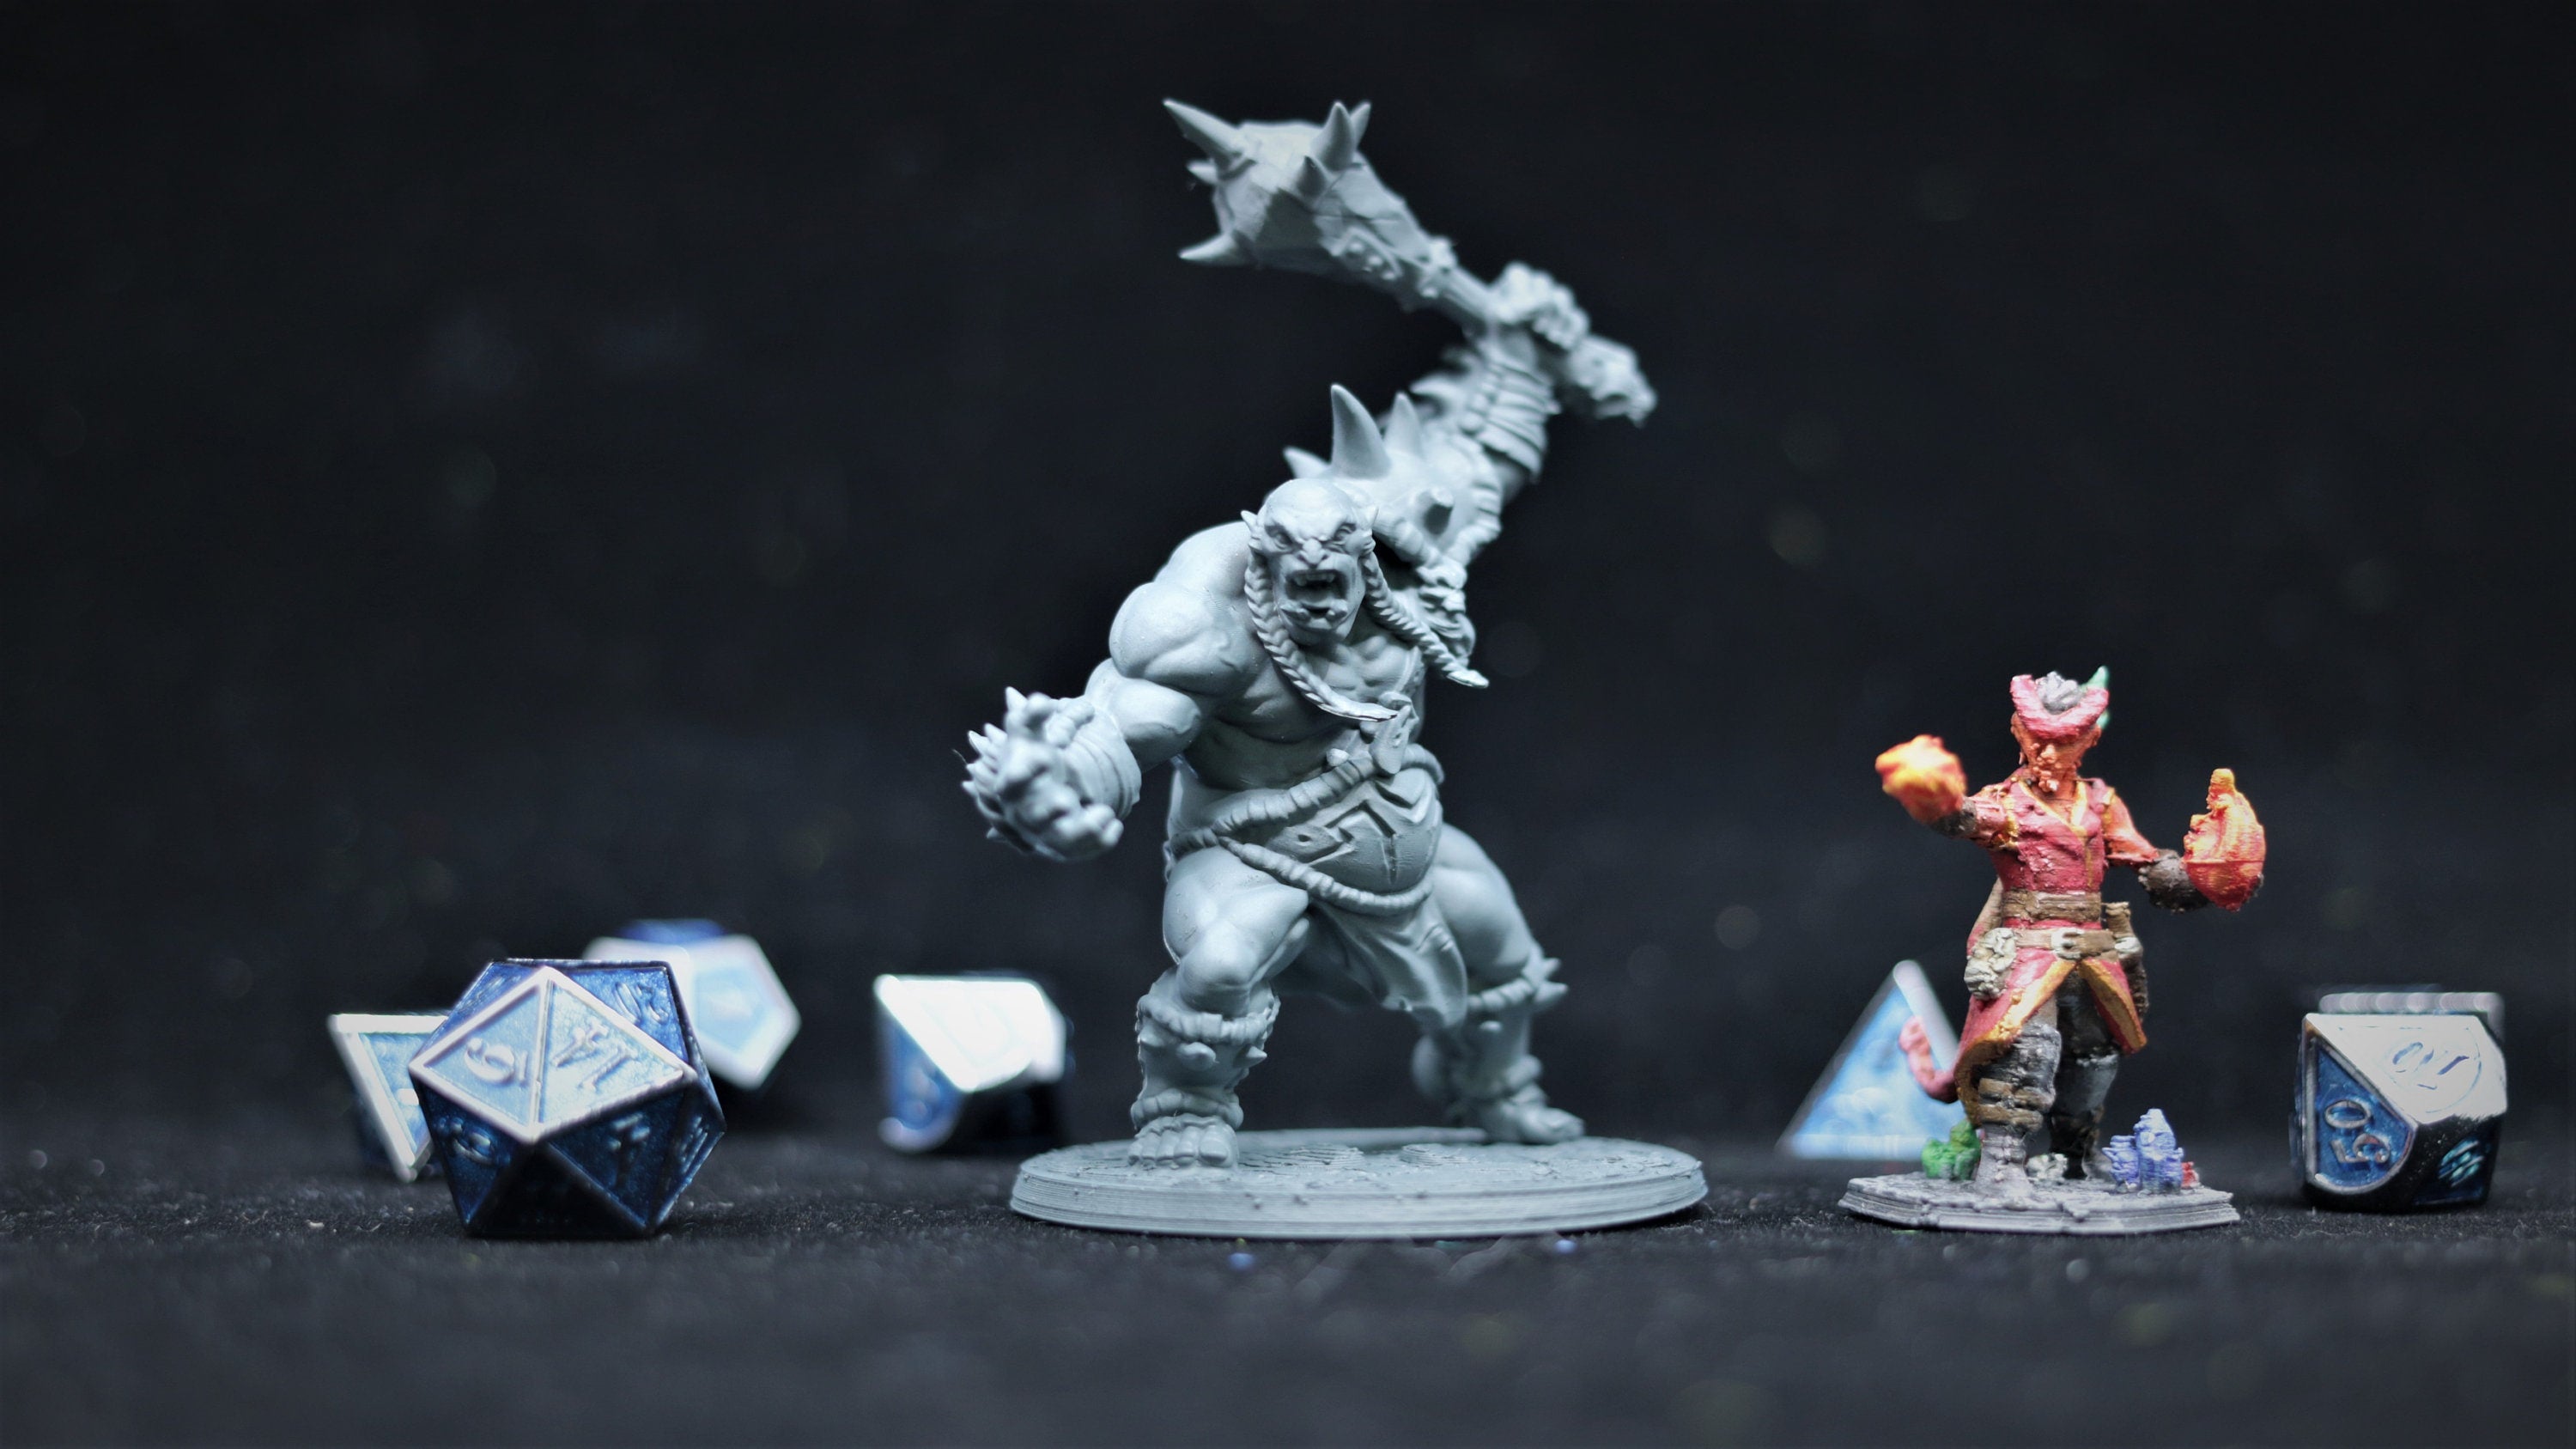 OGRE ORC Marauder "Club Swinger"-Role Playing Miniatures